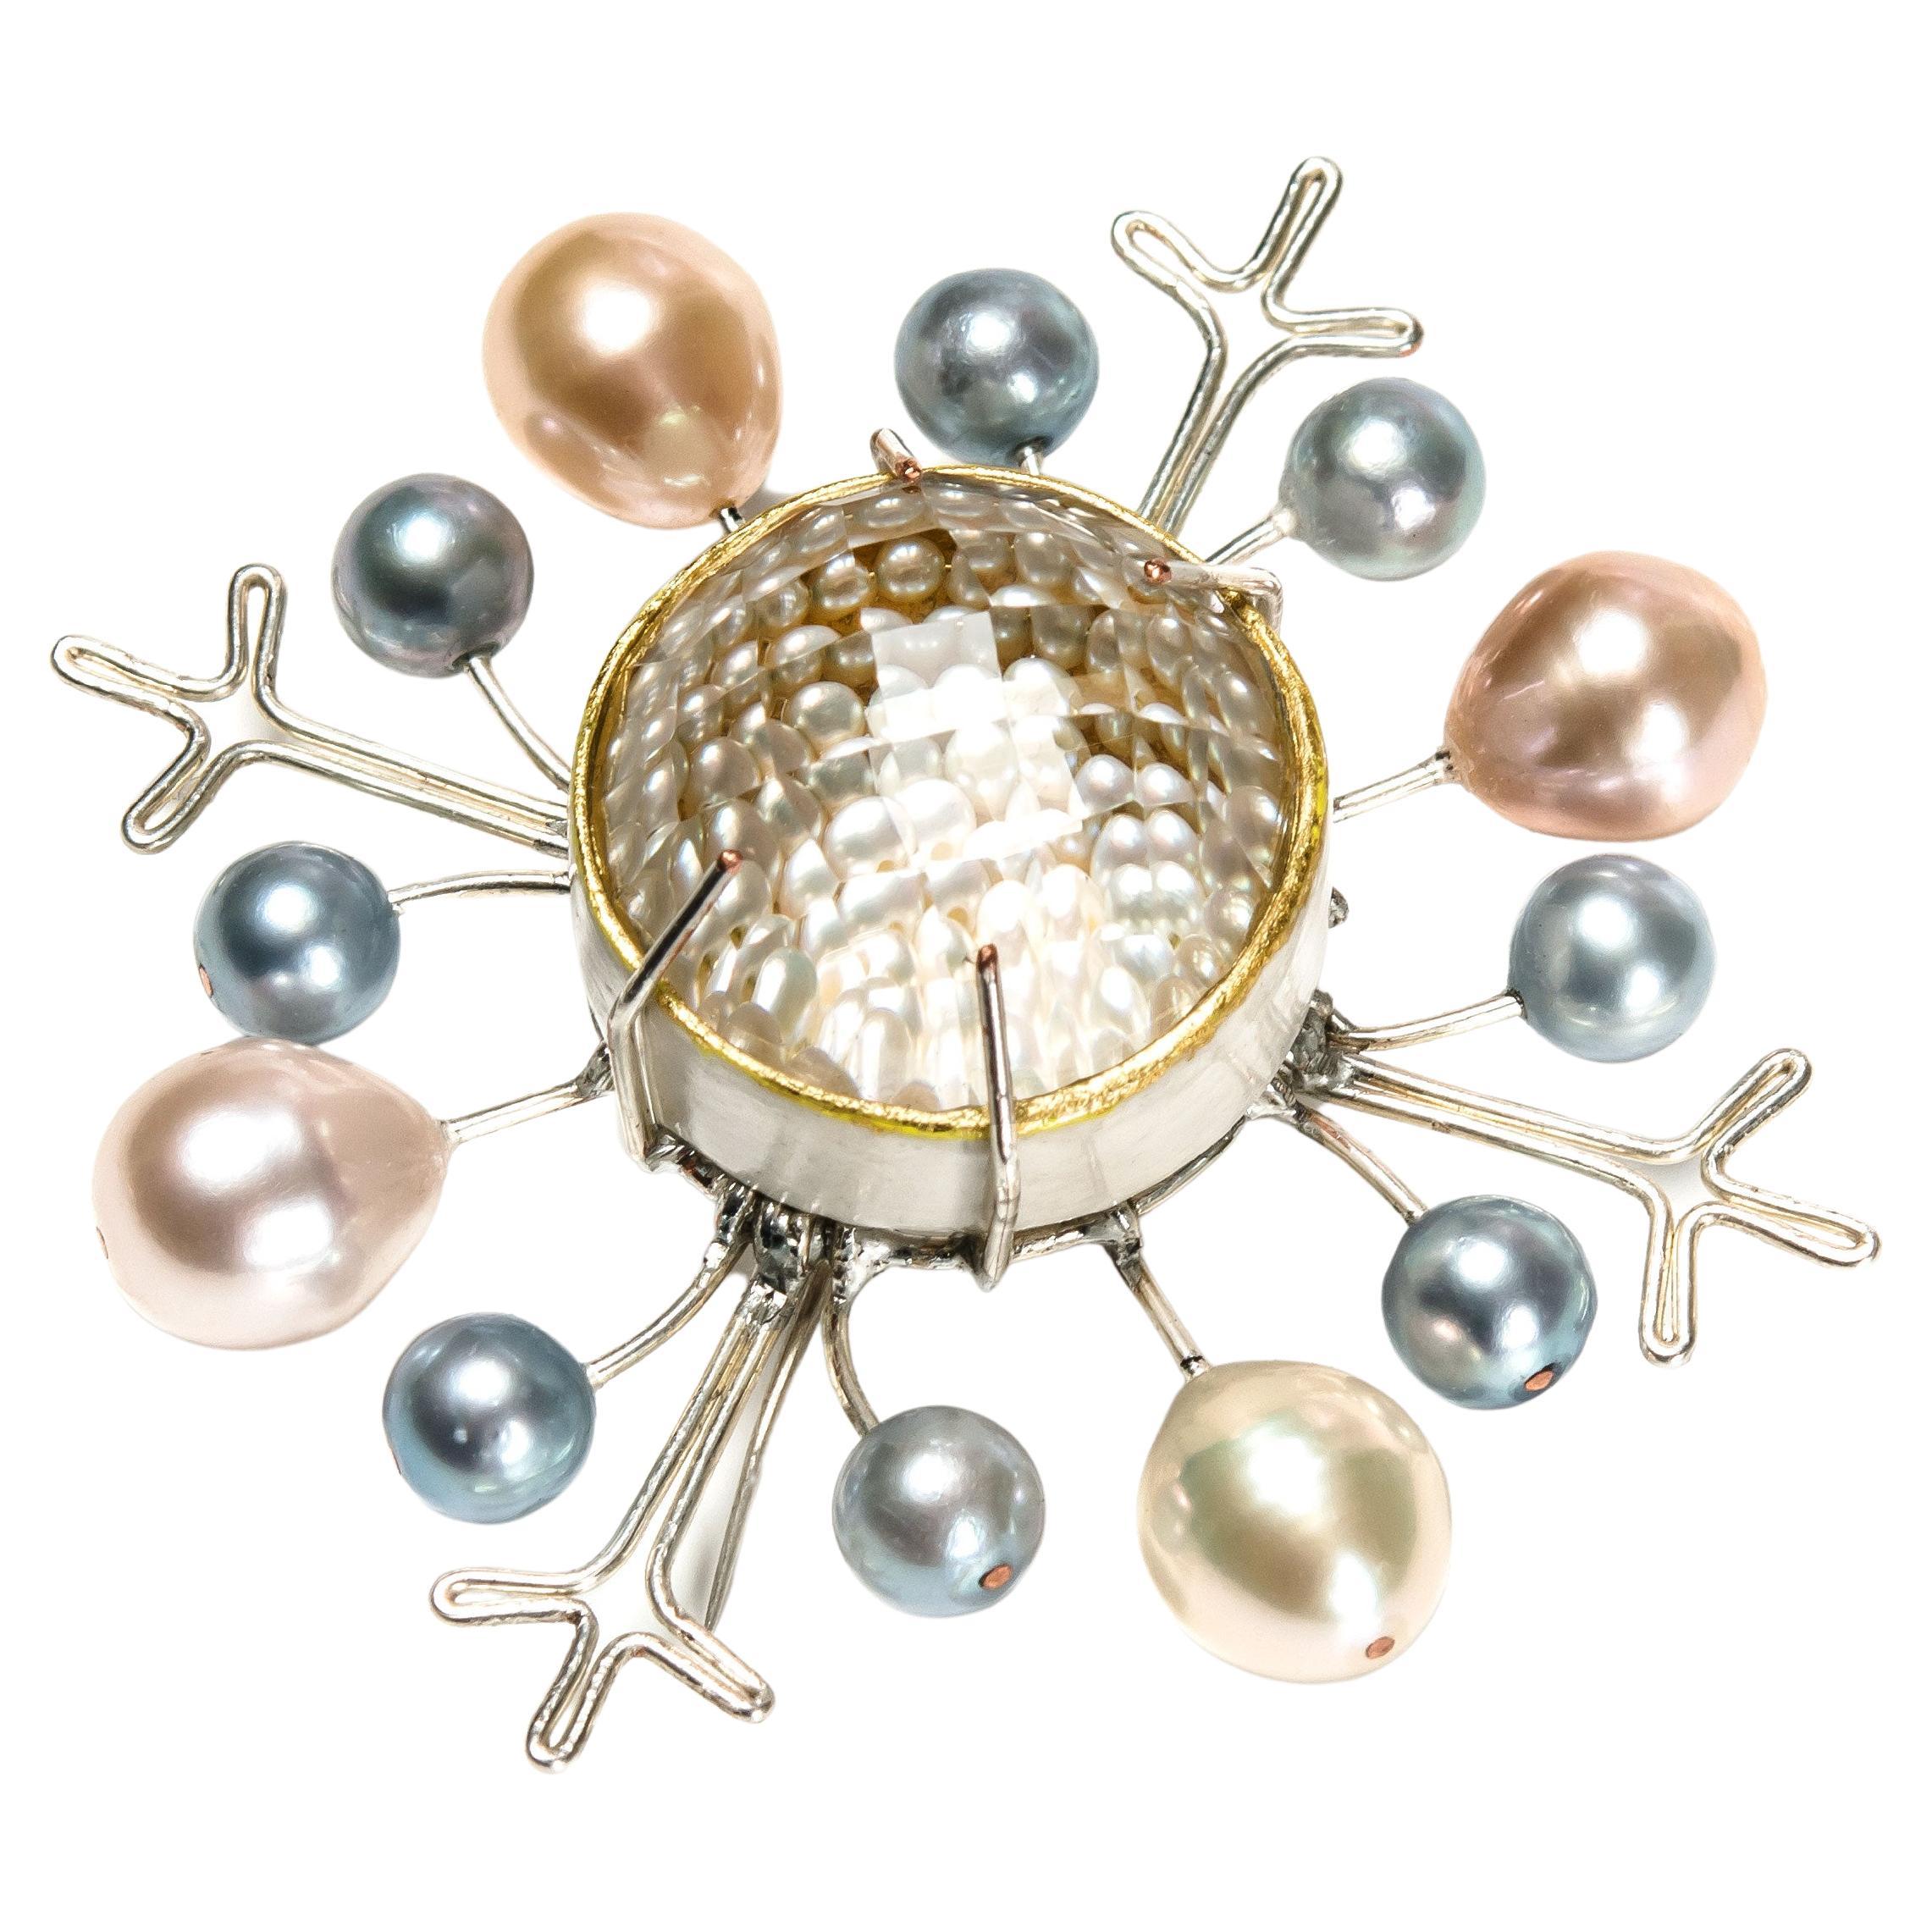 Bodyfurnitures Brooch: Transparency View with Rock Crystal with Pearls, Silver